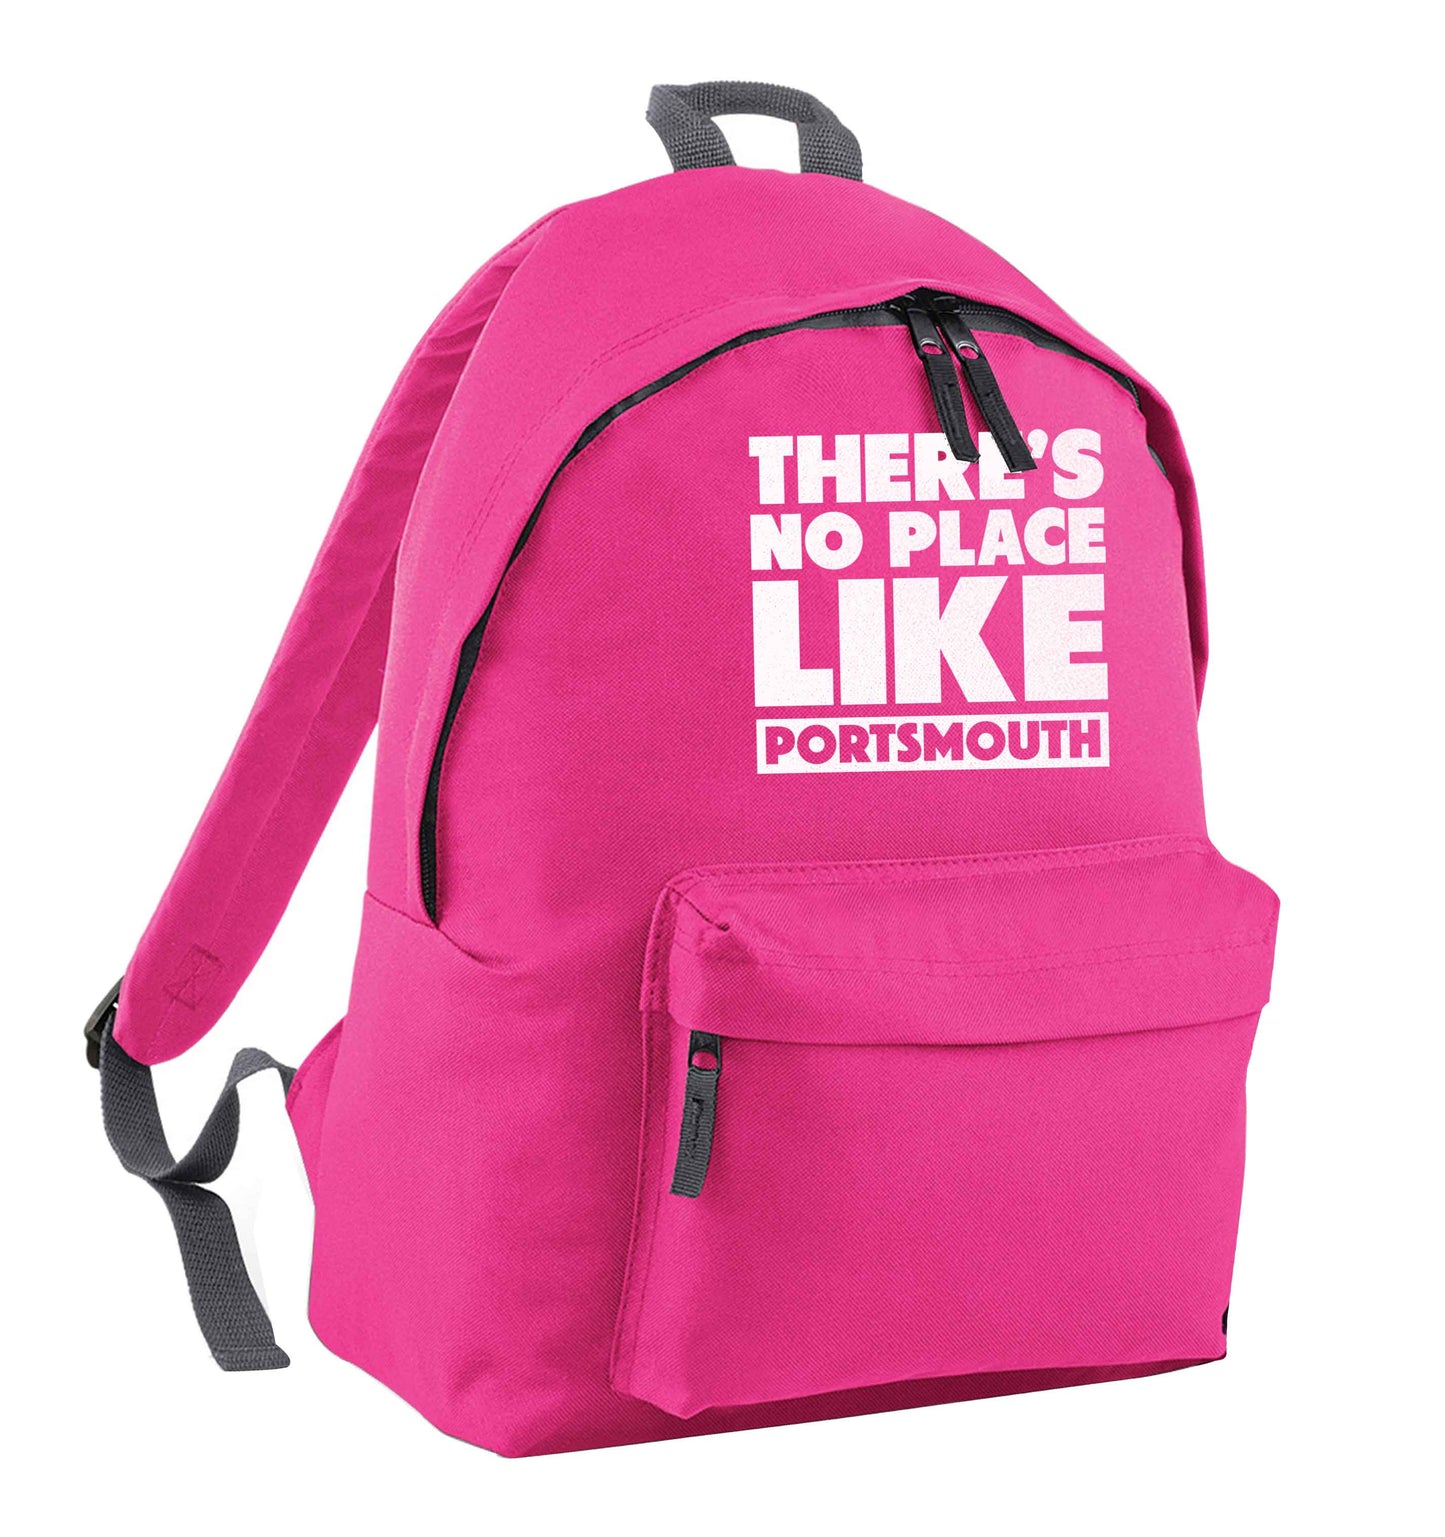 There's no place like Porstmouth pink adults backpack